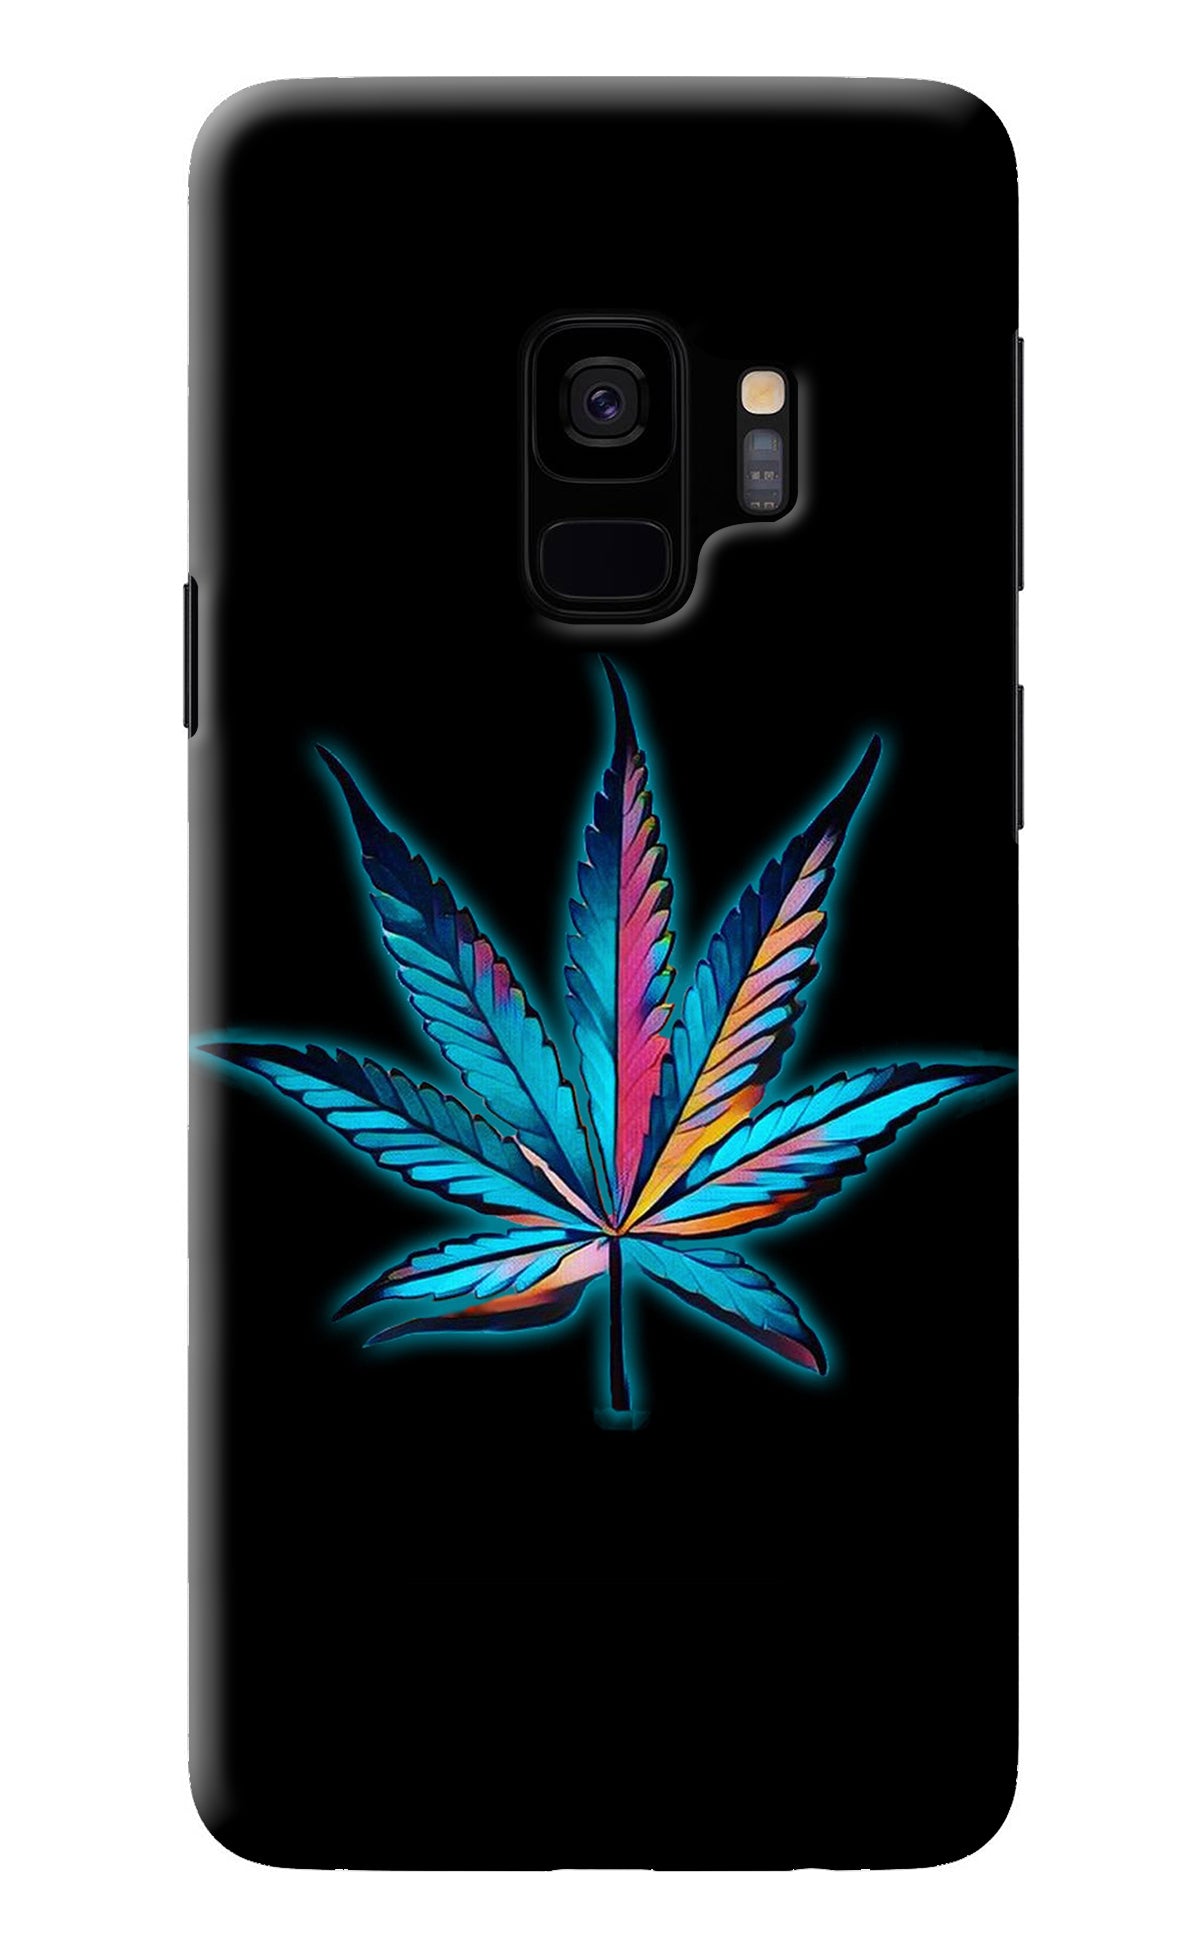 Weed Samsung S9 Back Cover